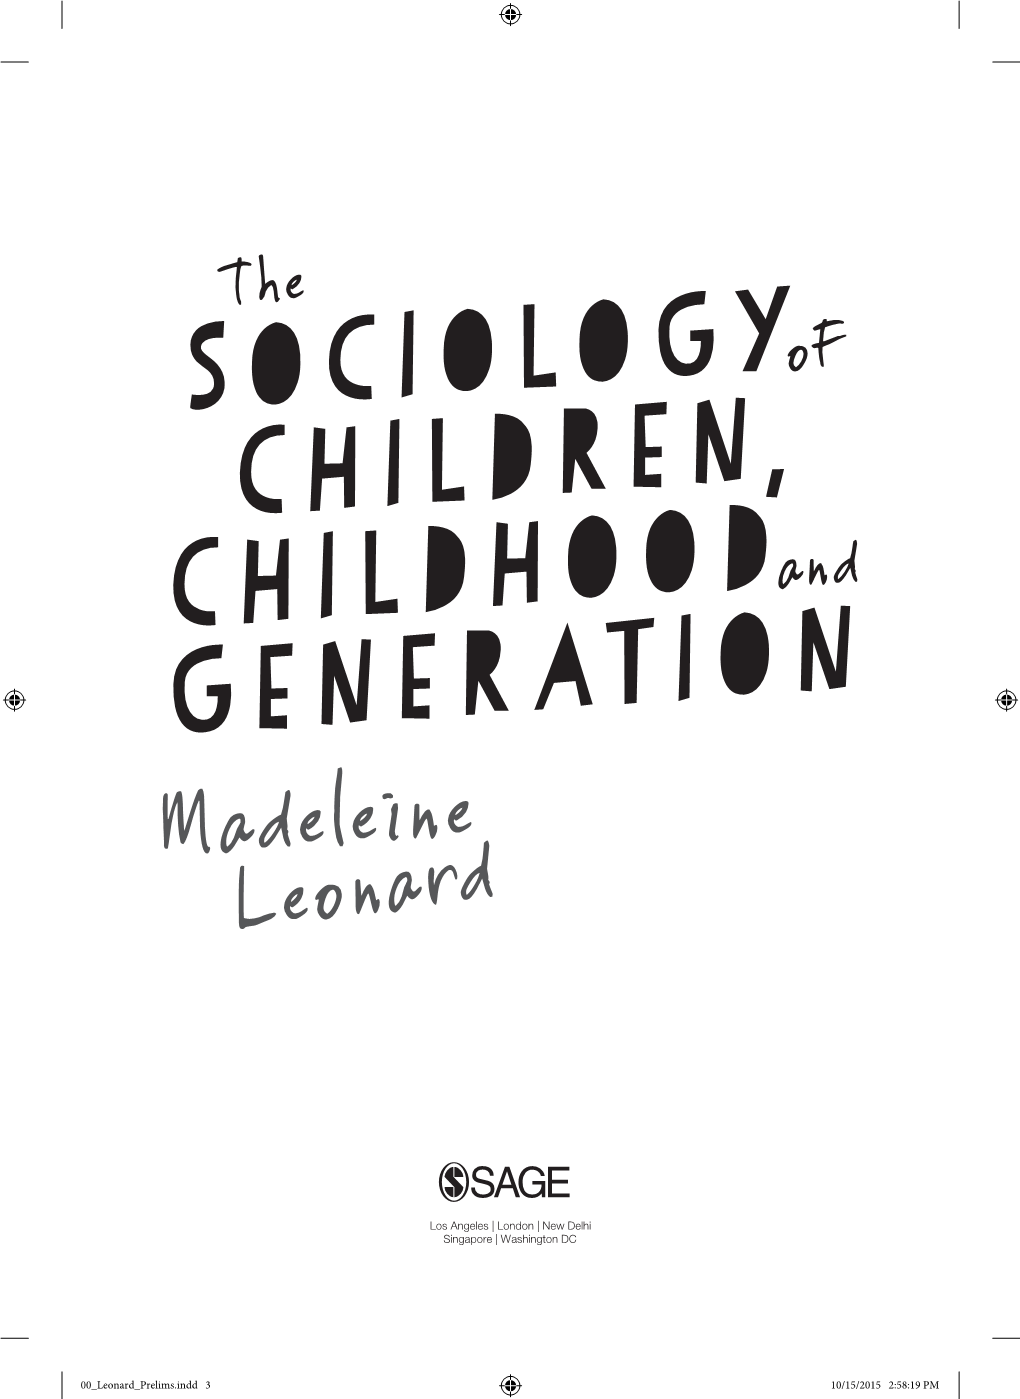 The Sociology of Children, Childhood and Generation